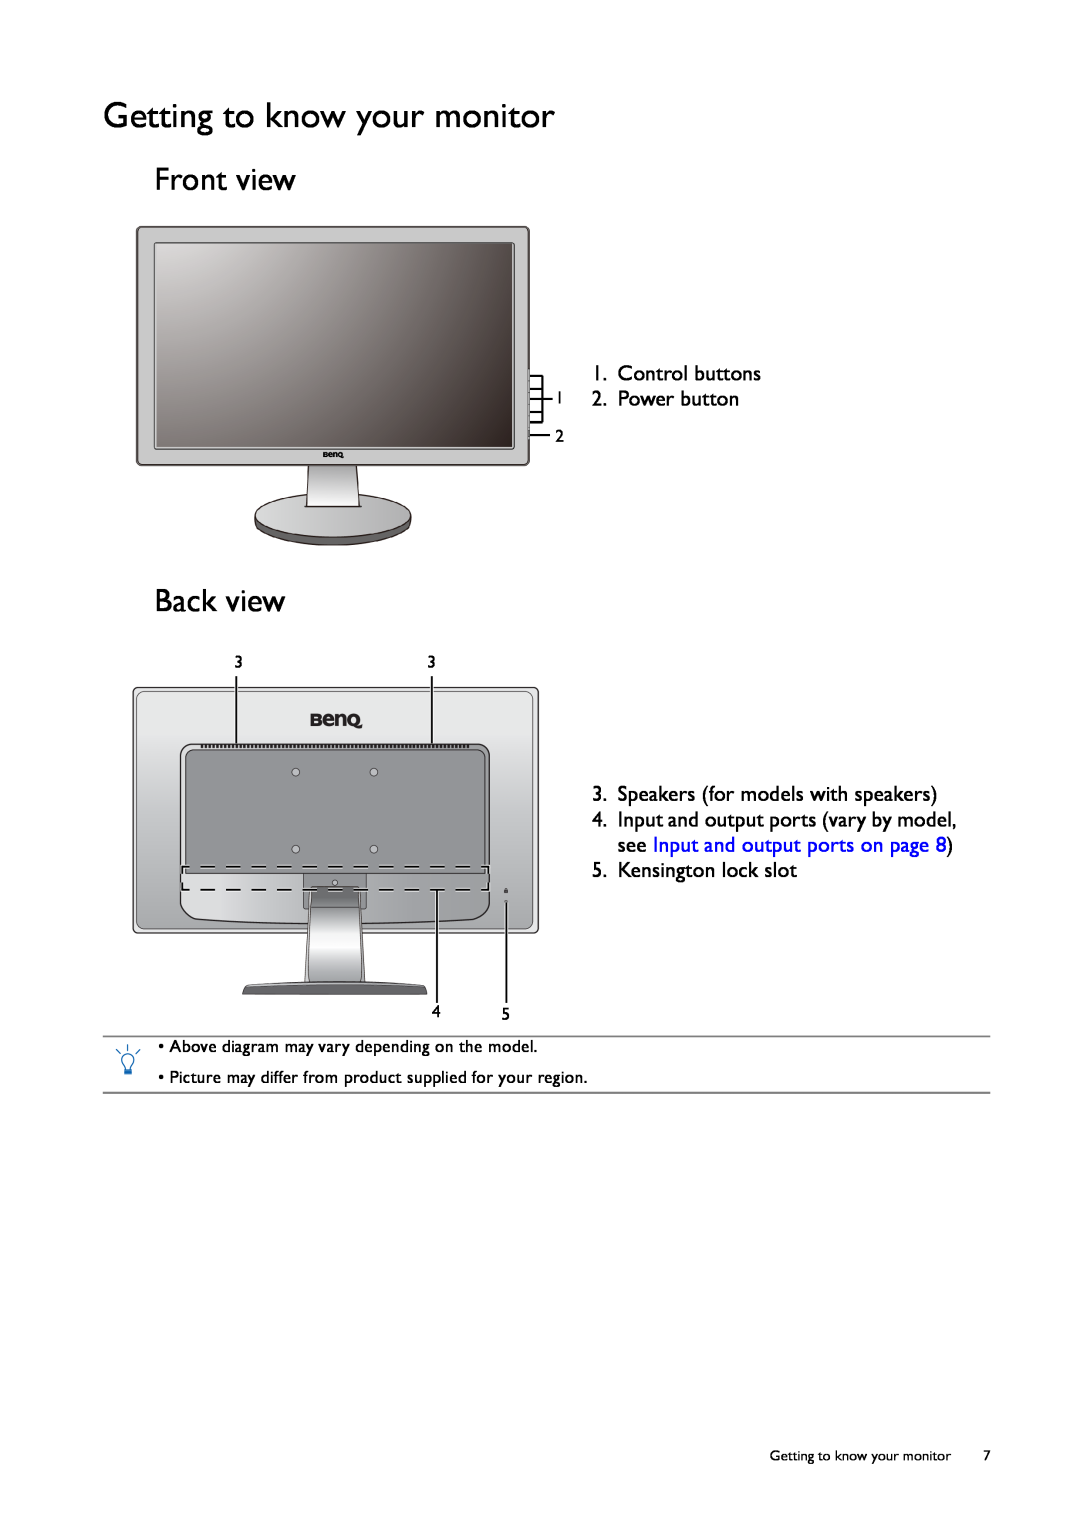 BenQ GW2255, GW2750HM Getting to know your monitor, Front view, Back view, Above diagram may vary depending on the model 